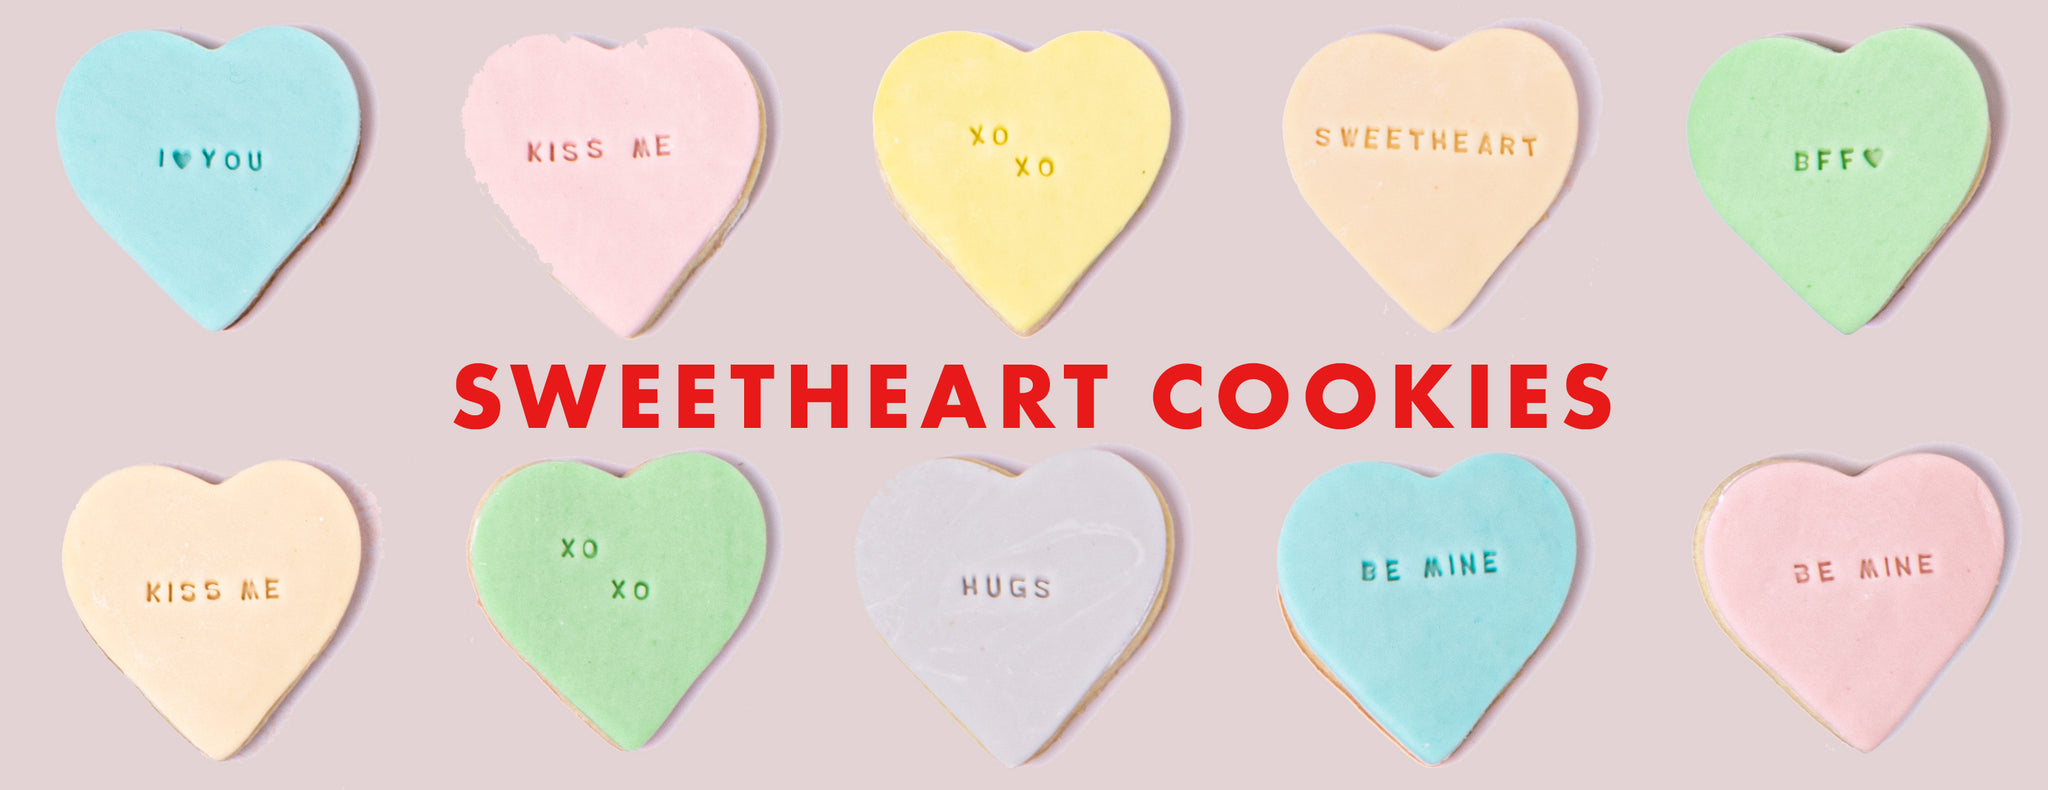 PARTY ET CIE BAKES - SWEETHEART COOKIES